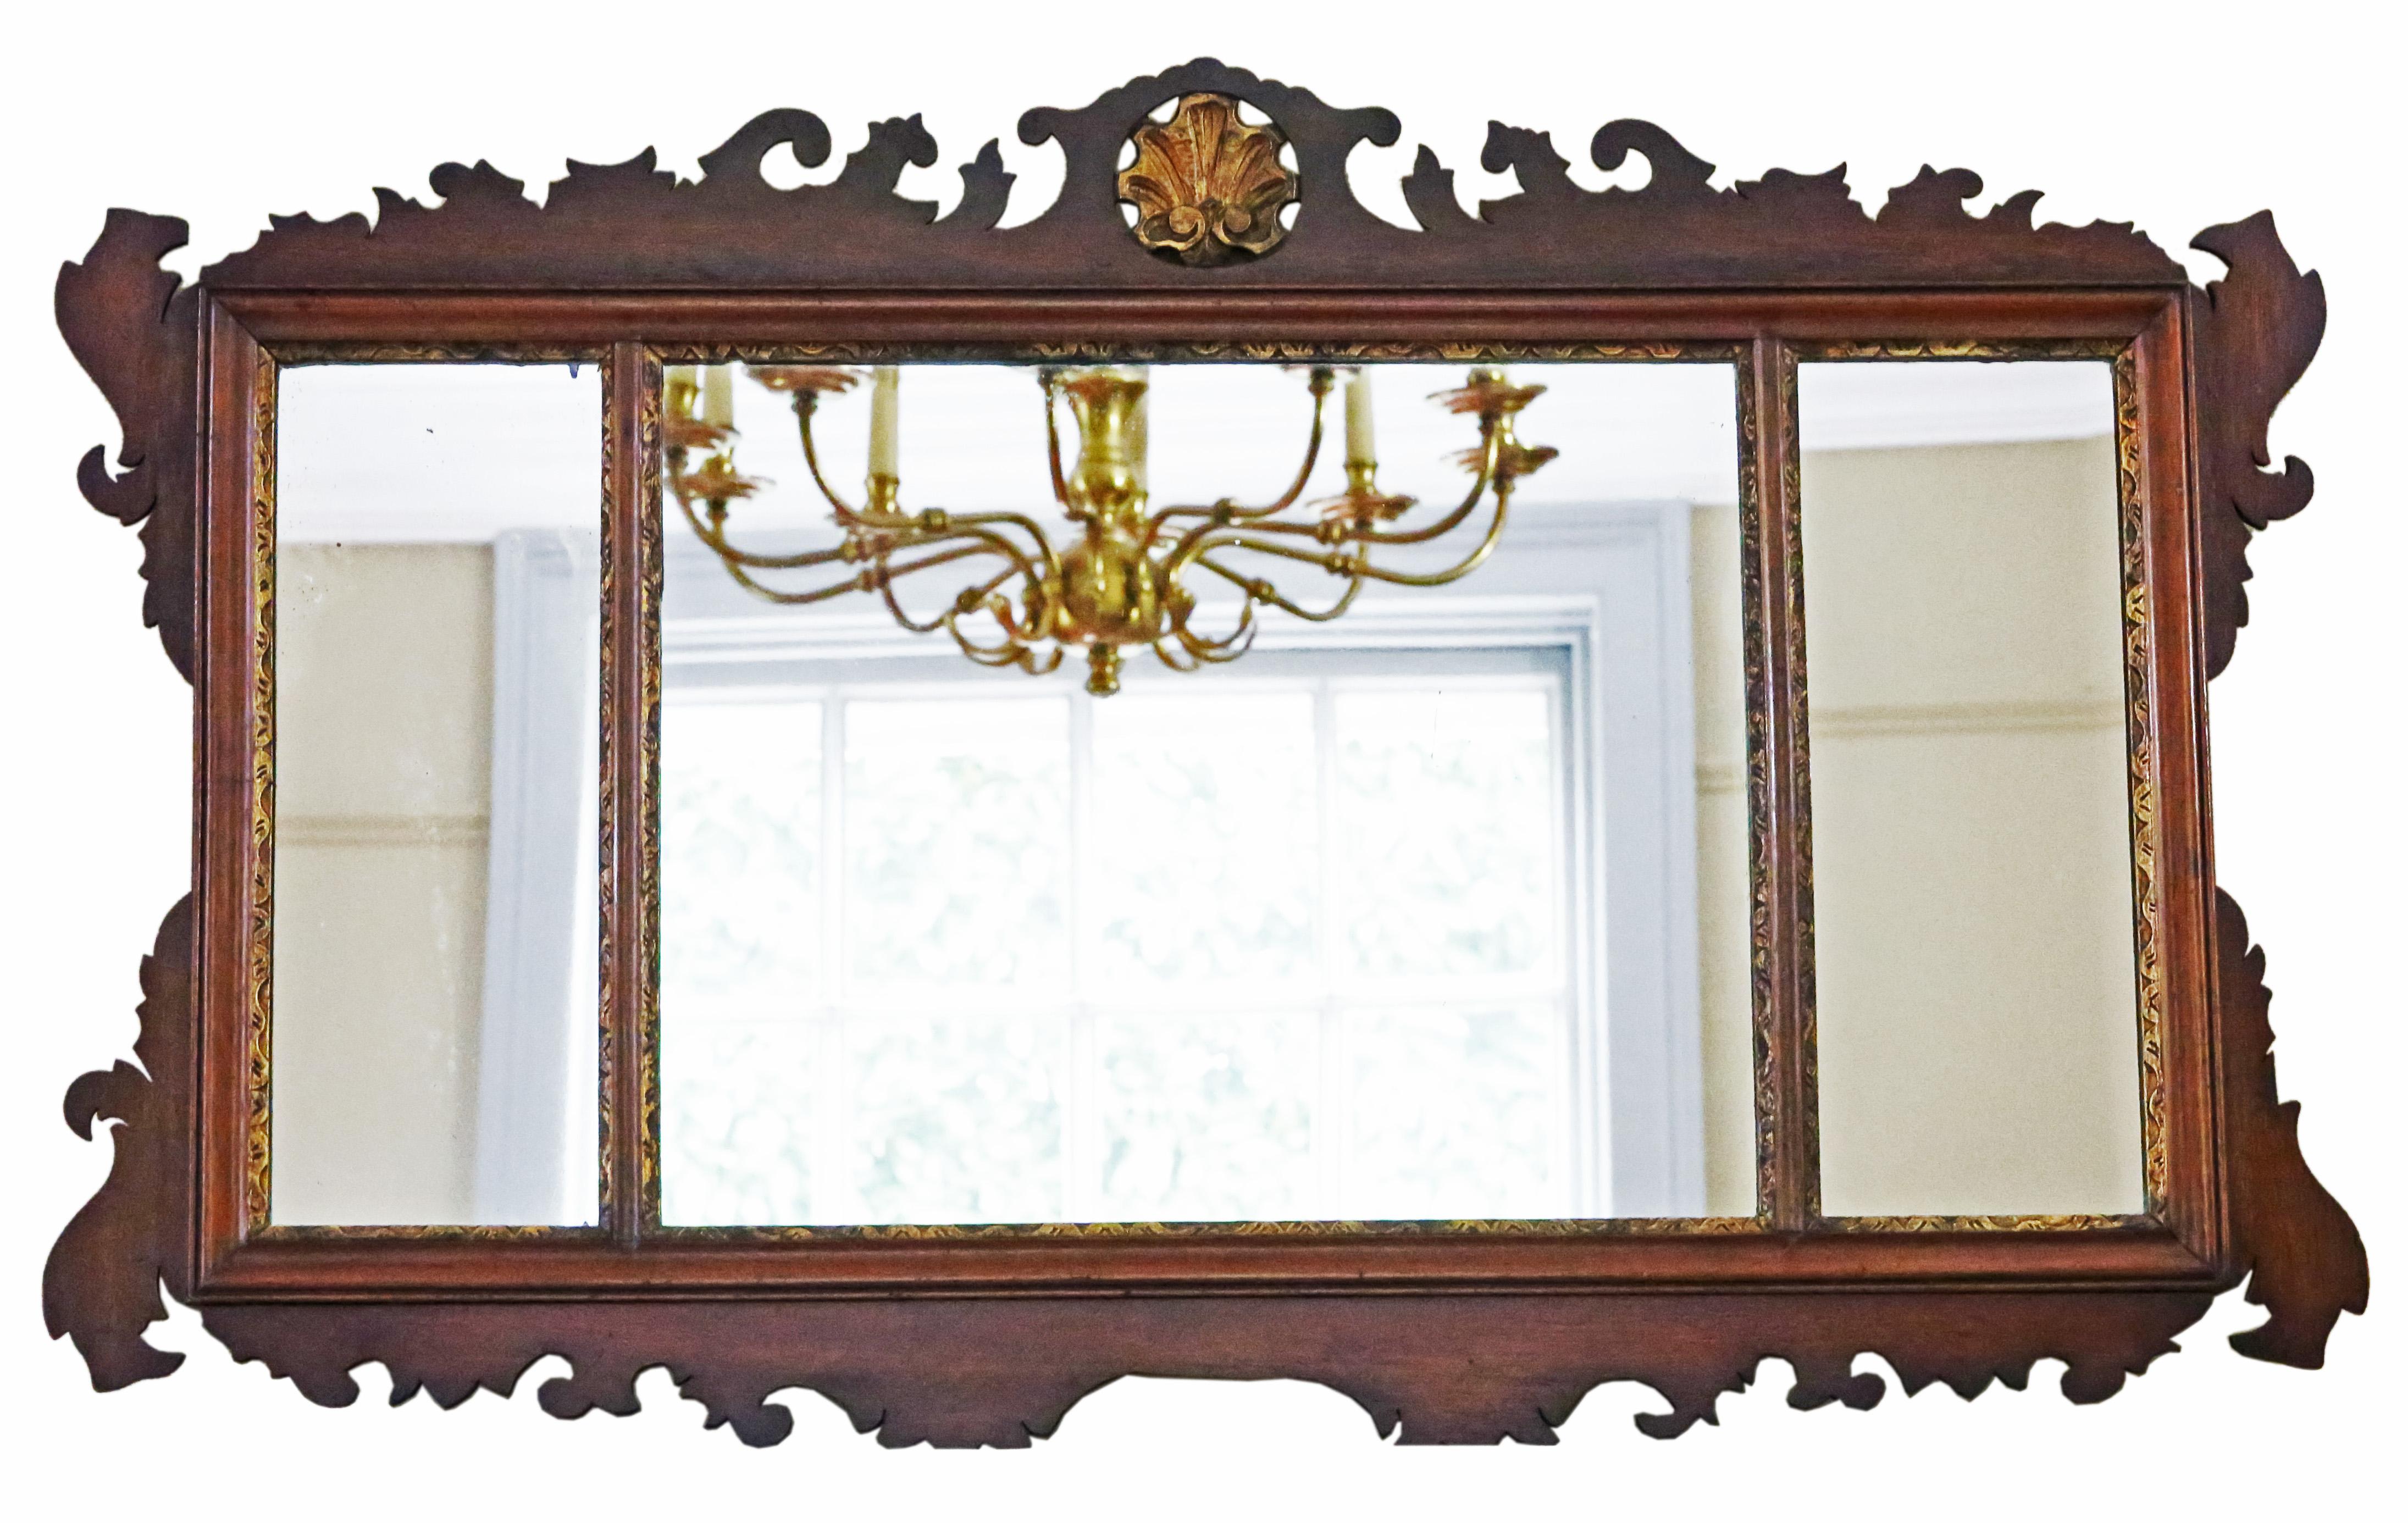 Antique large gilt and mahogany overmantle wall mirror from circa 1900, featuring fine quality and adorned with a decorative fret-cut design.

This mirror captivates with its simple yet striking design, enhancing the character of any suitable space.